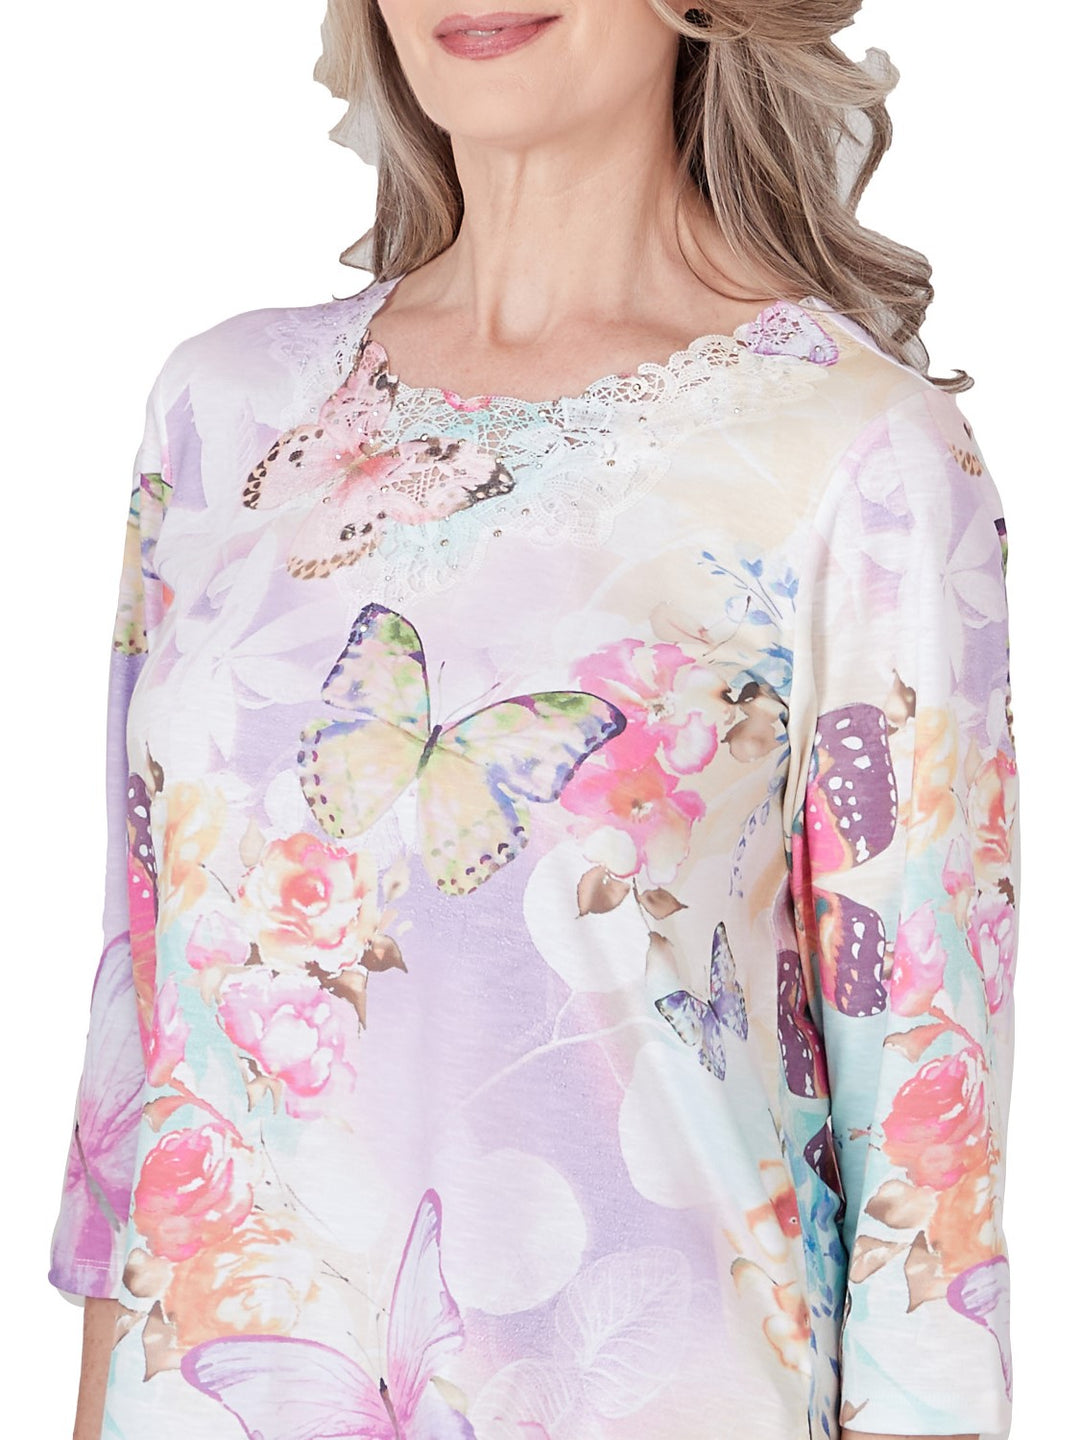 Butterfly Print 3/4 Sleeve Top